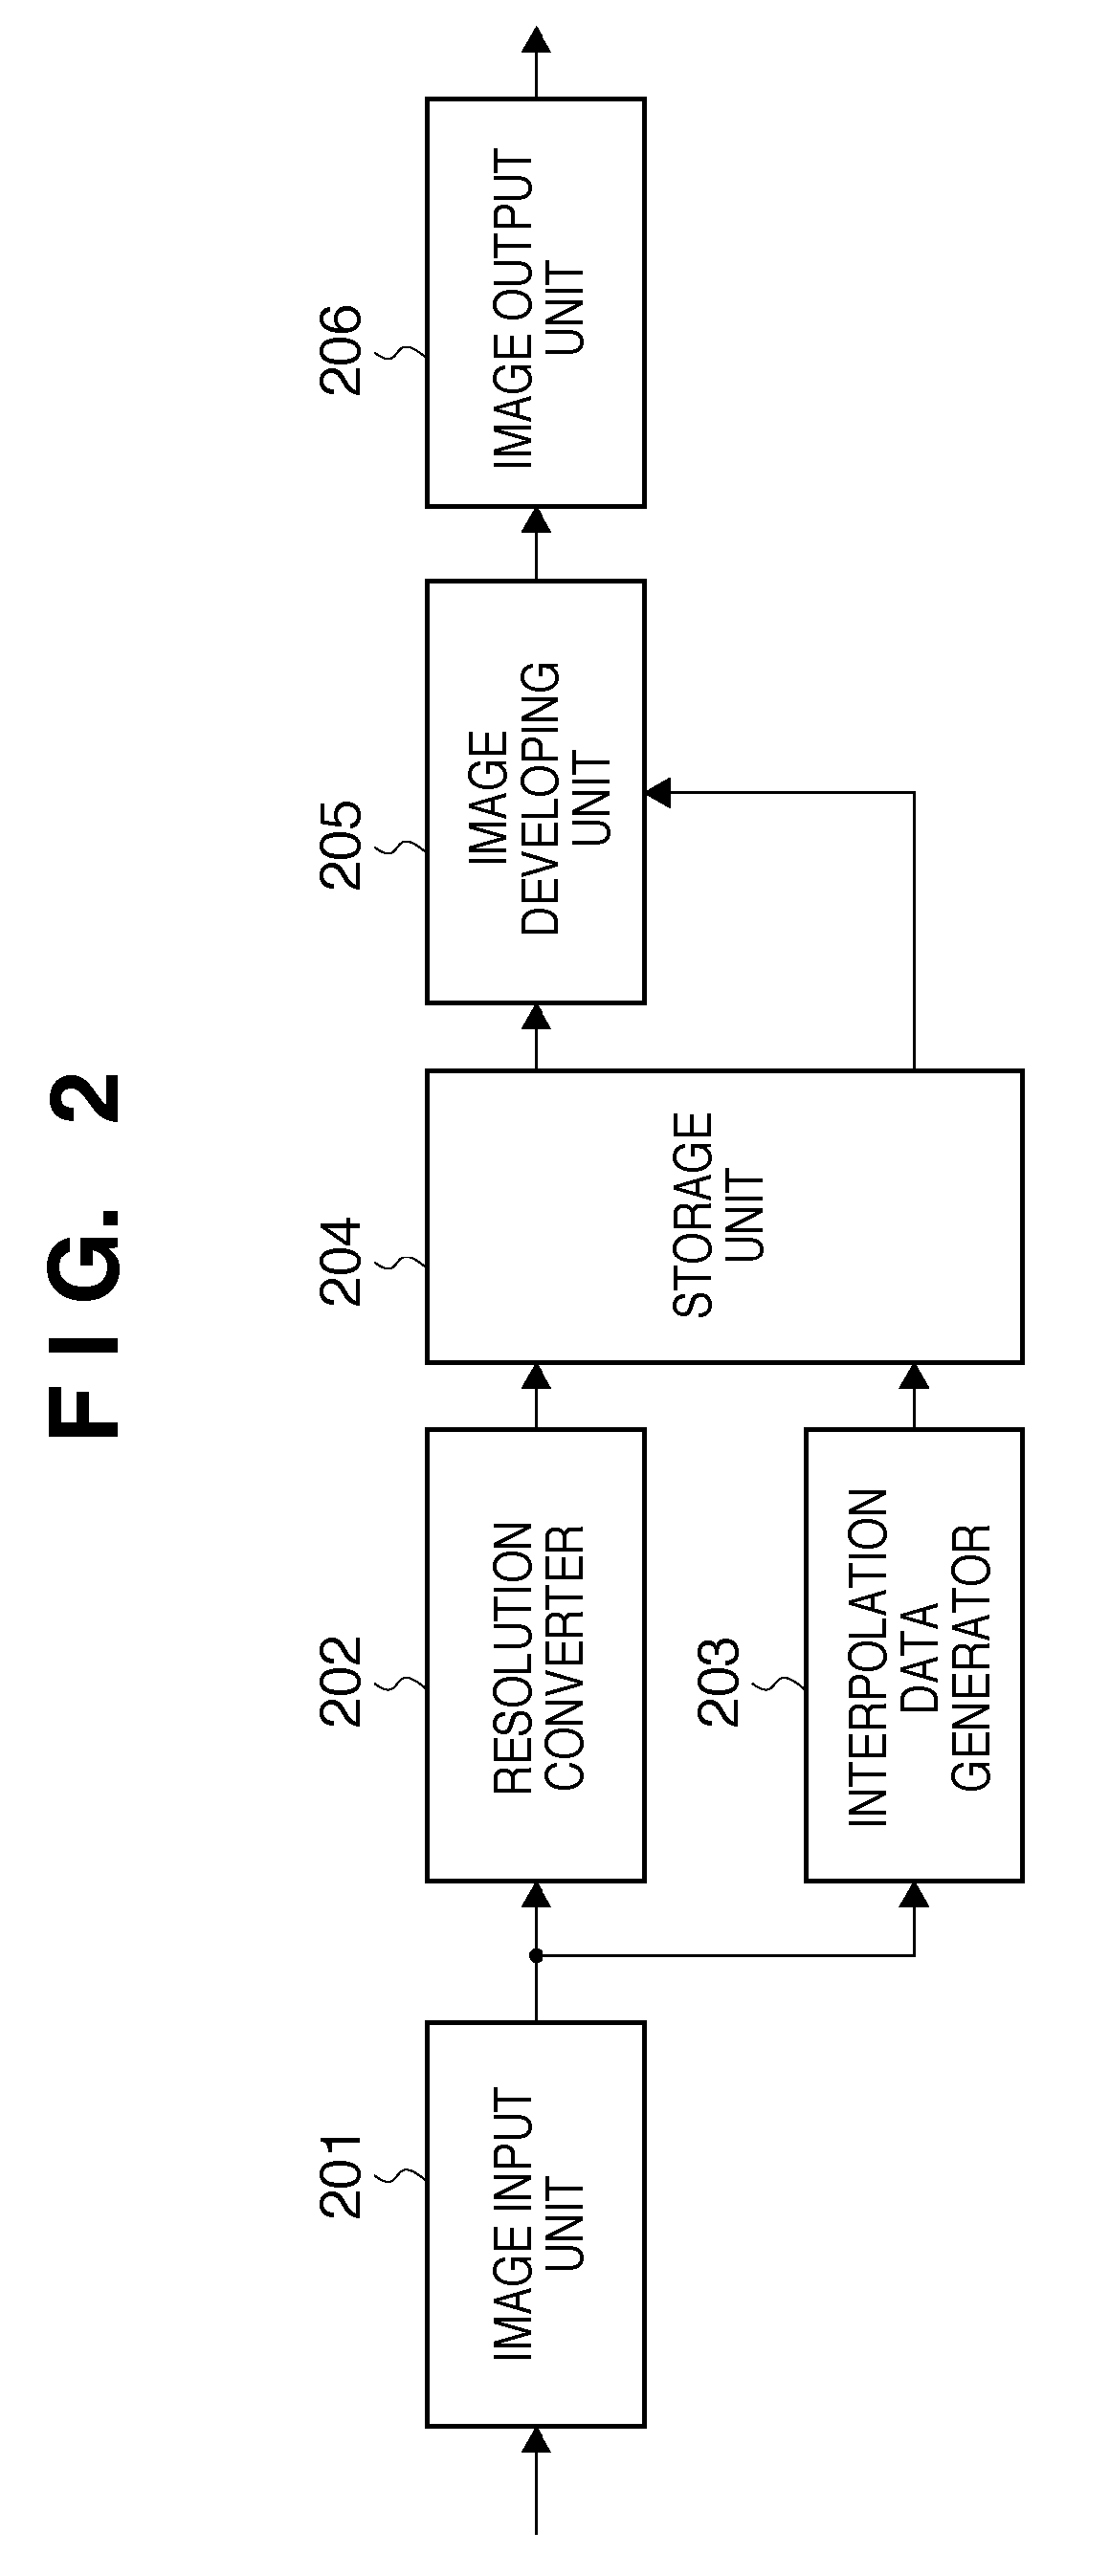 Image encoding apparatus and method of controlling the same